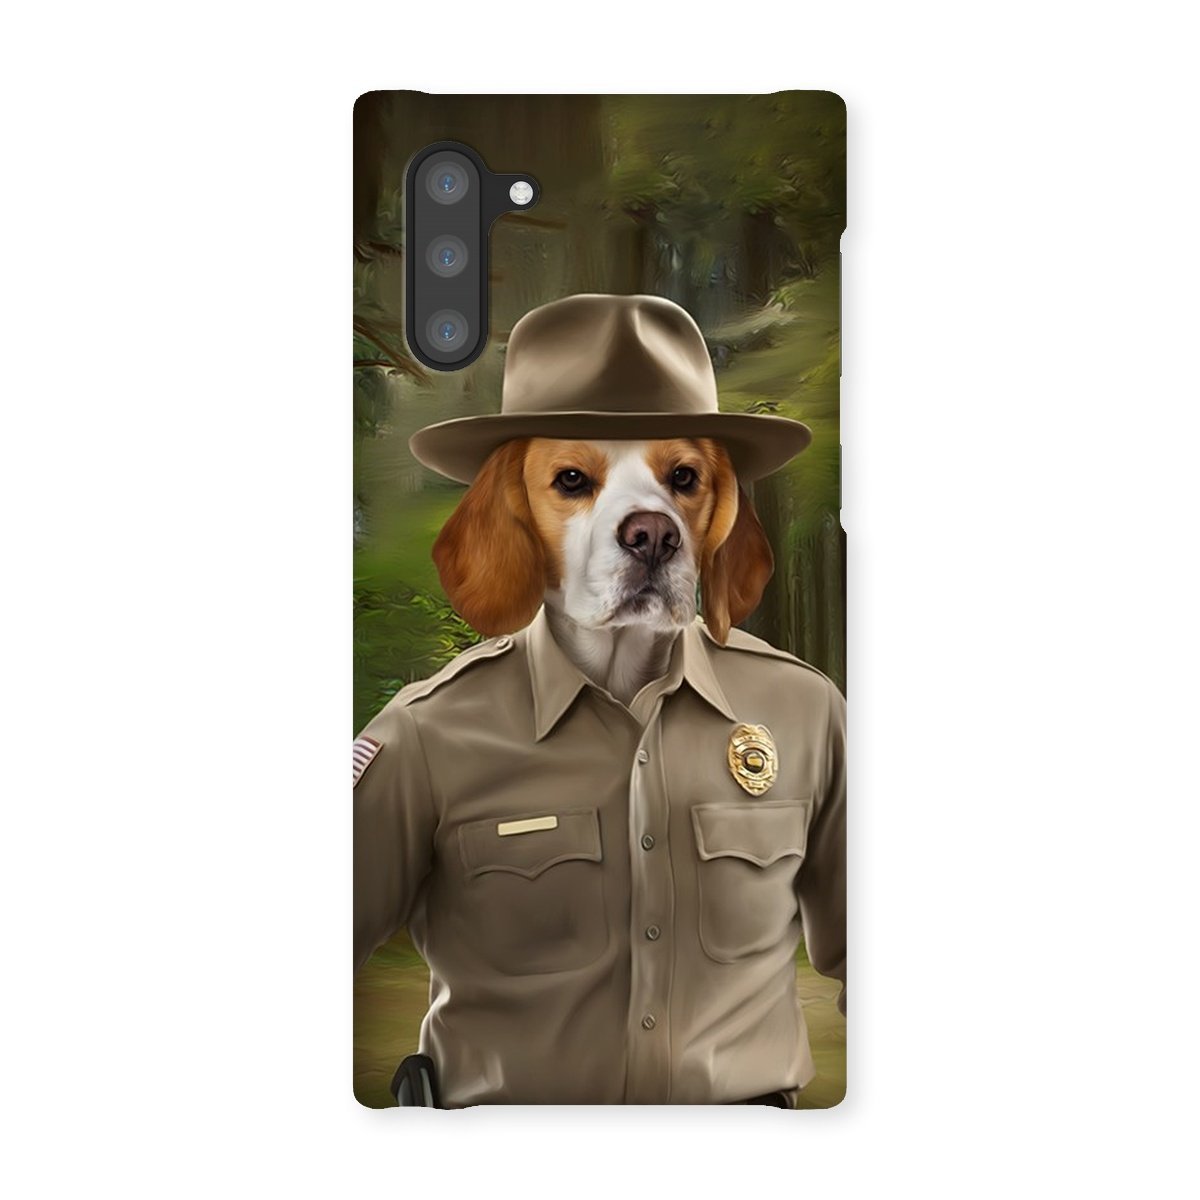 Hopper (Stranger Things Inspired): Custom Pet Phone Case - Paw & Glory - pawandglory, custom pet phone case, puppy phone case, iphone 11 case dogs, personalised puppy phone case, life is better with a dog phone case, dog and owner phone case, Pet Portraits phone case,